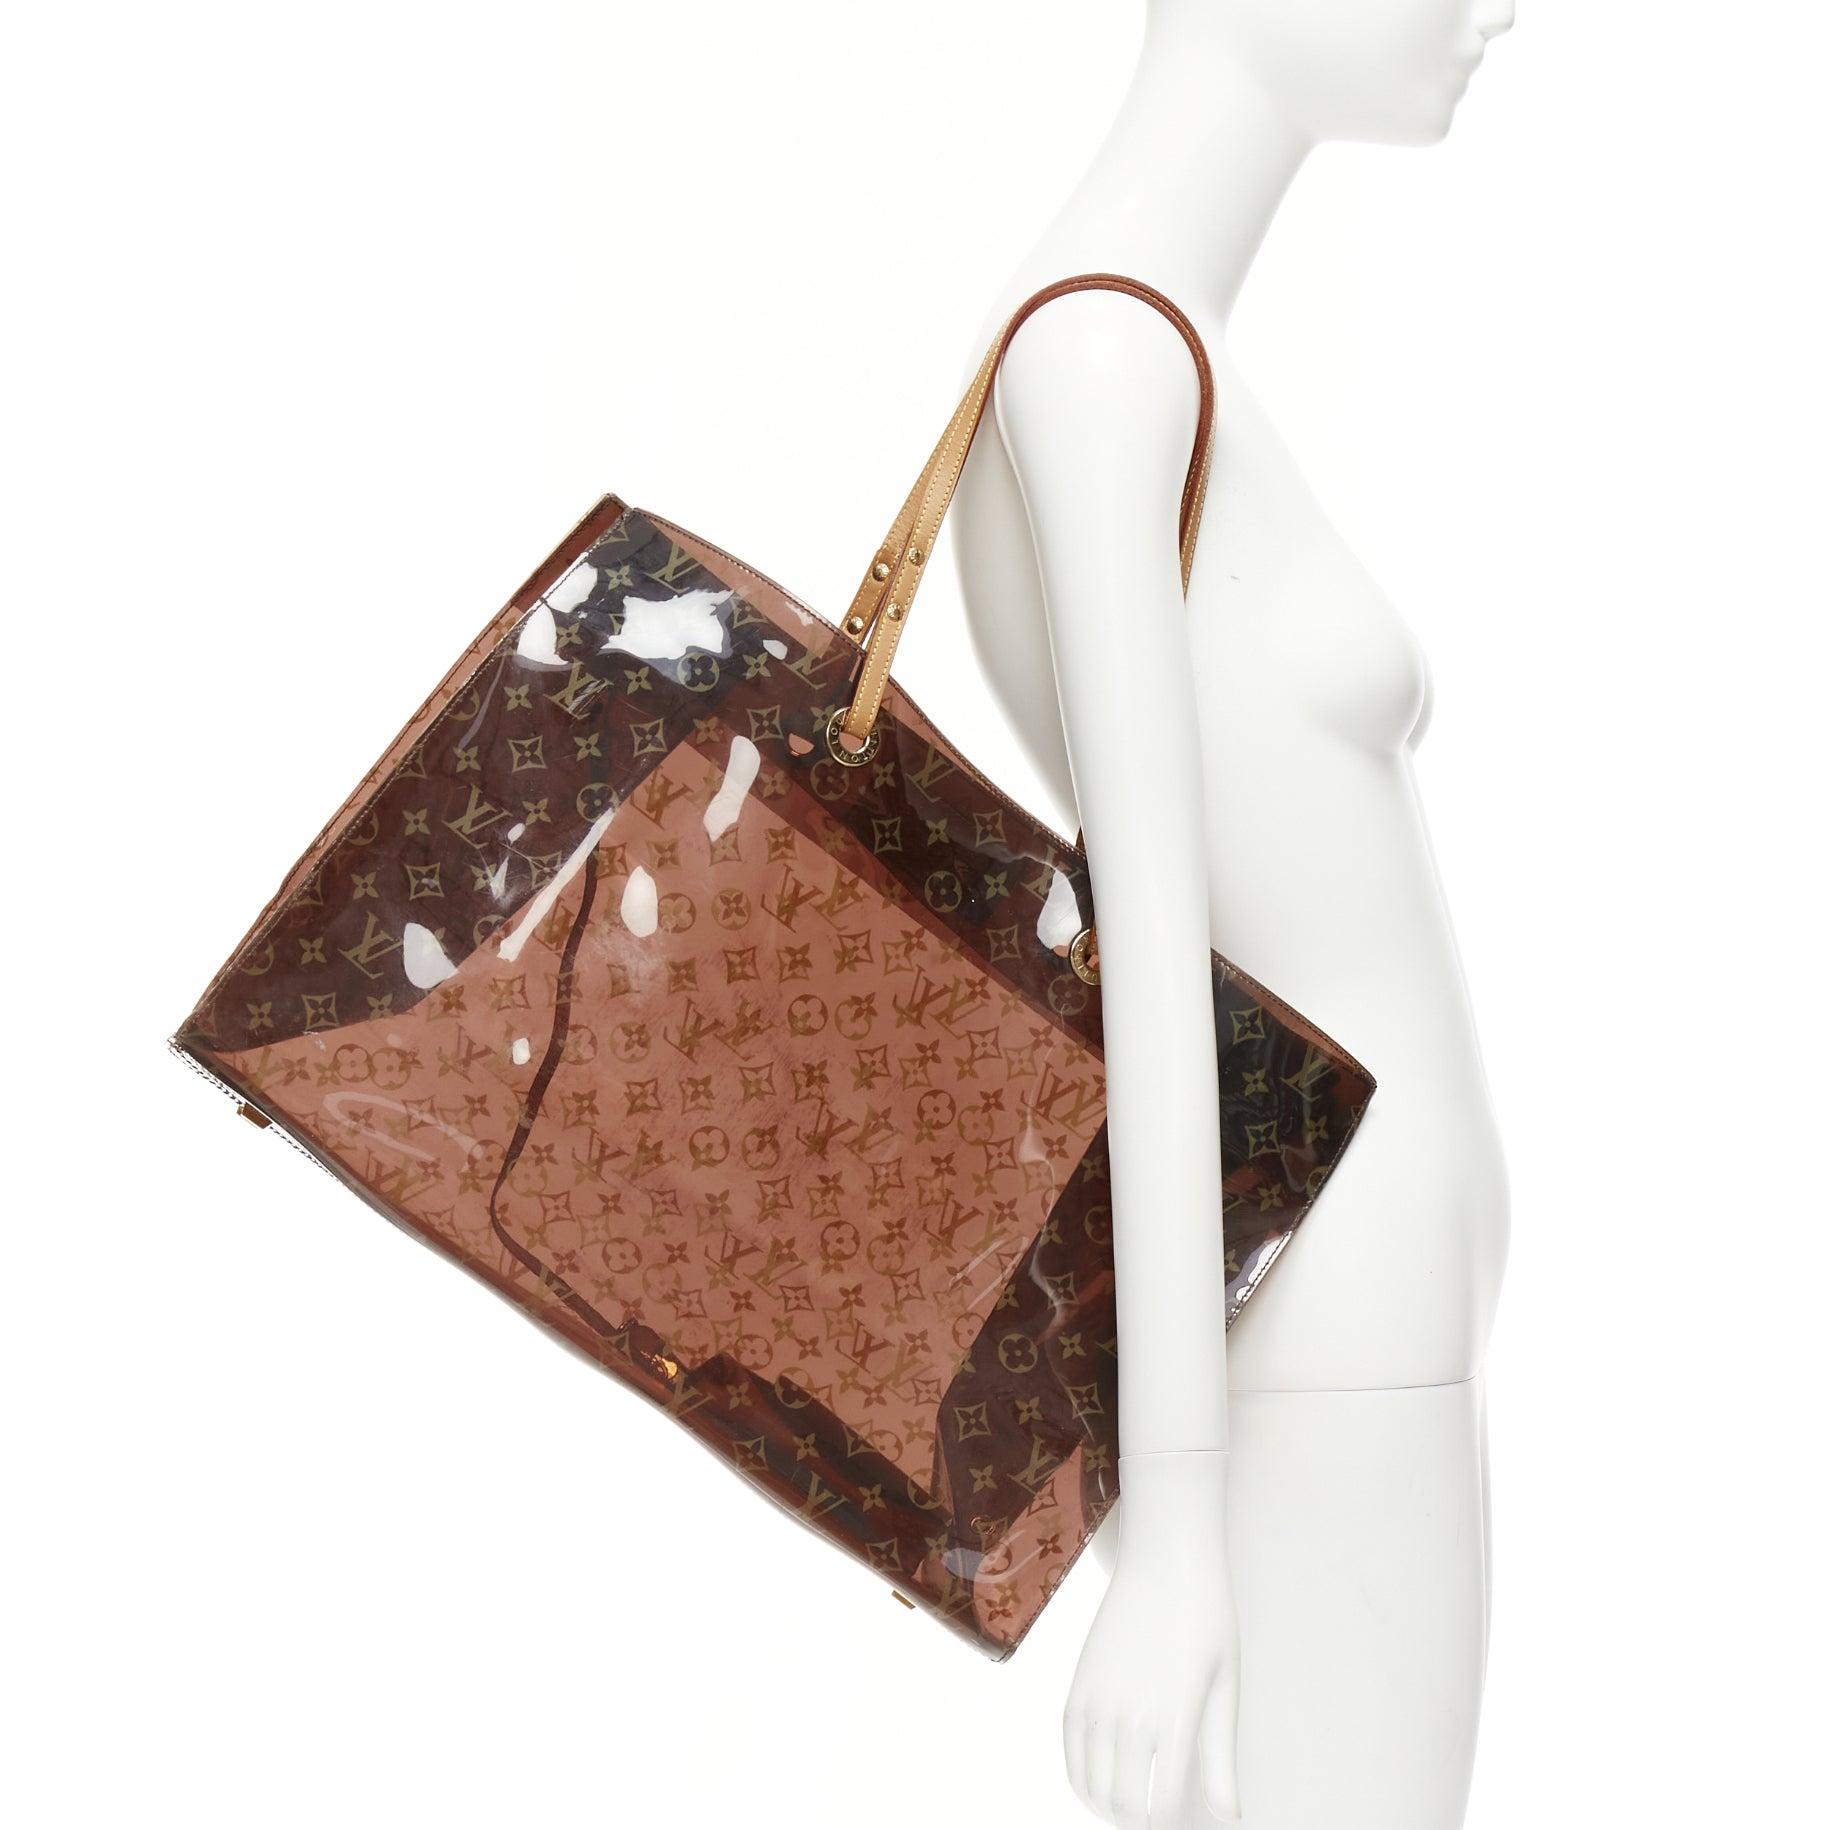 LOUIS VUITTON 2000 Cabas Cruise brown LV monogram PVC vinyl tote bag pouch
Reference: NKLL/A00246
Brand: Louis Vuitton
Model: Cabas
Material: Leather, PVC
Color: Brown, Beige
Pattern: Monogram
Lining: Beige Leather
Extra Details: Honey leather base